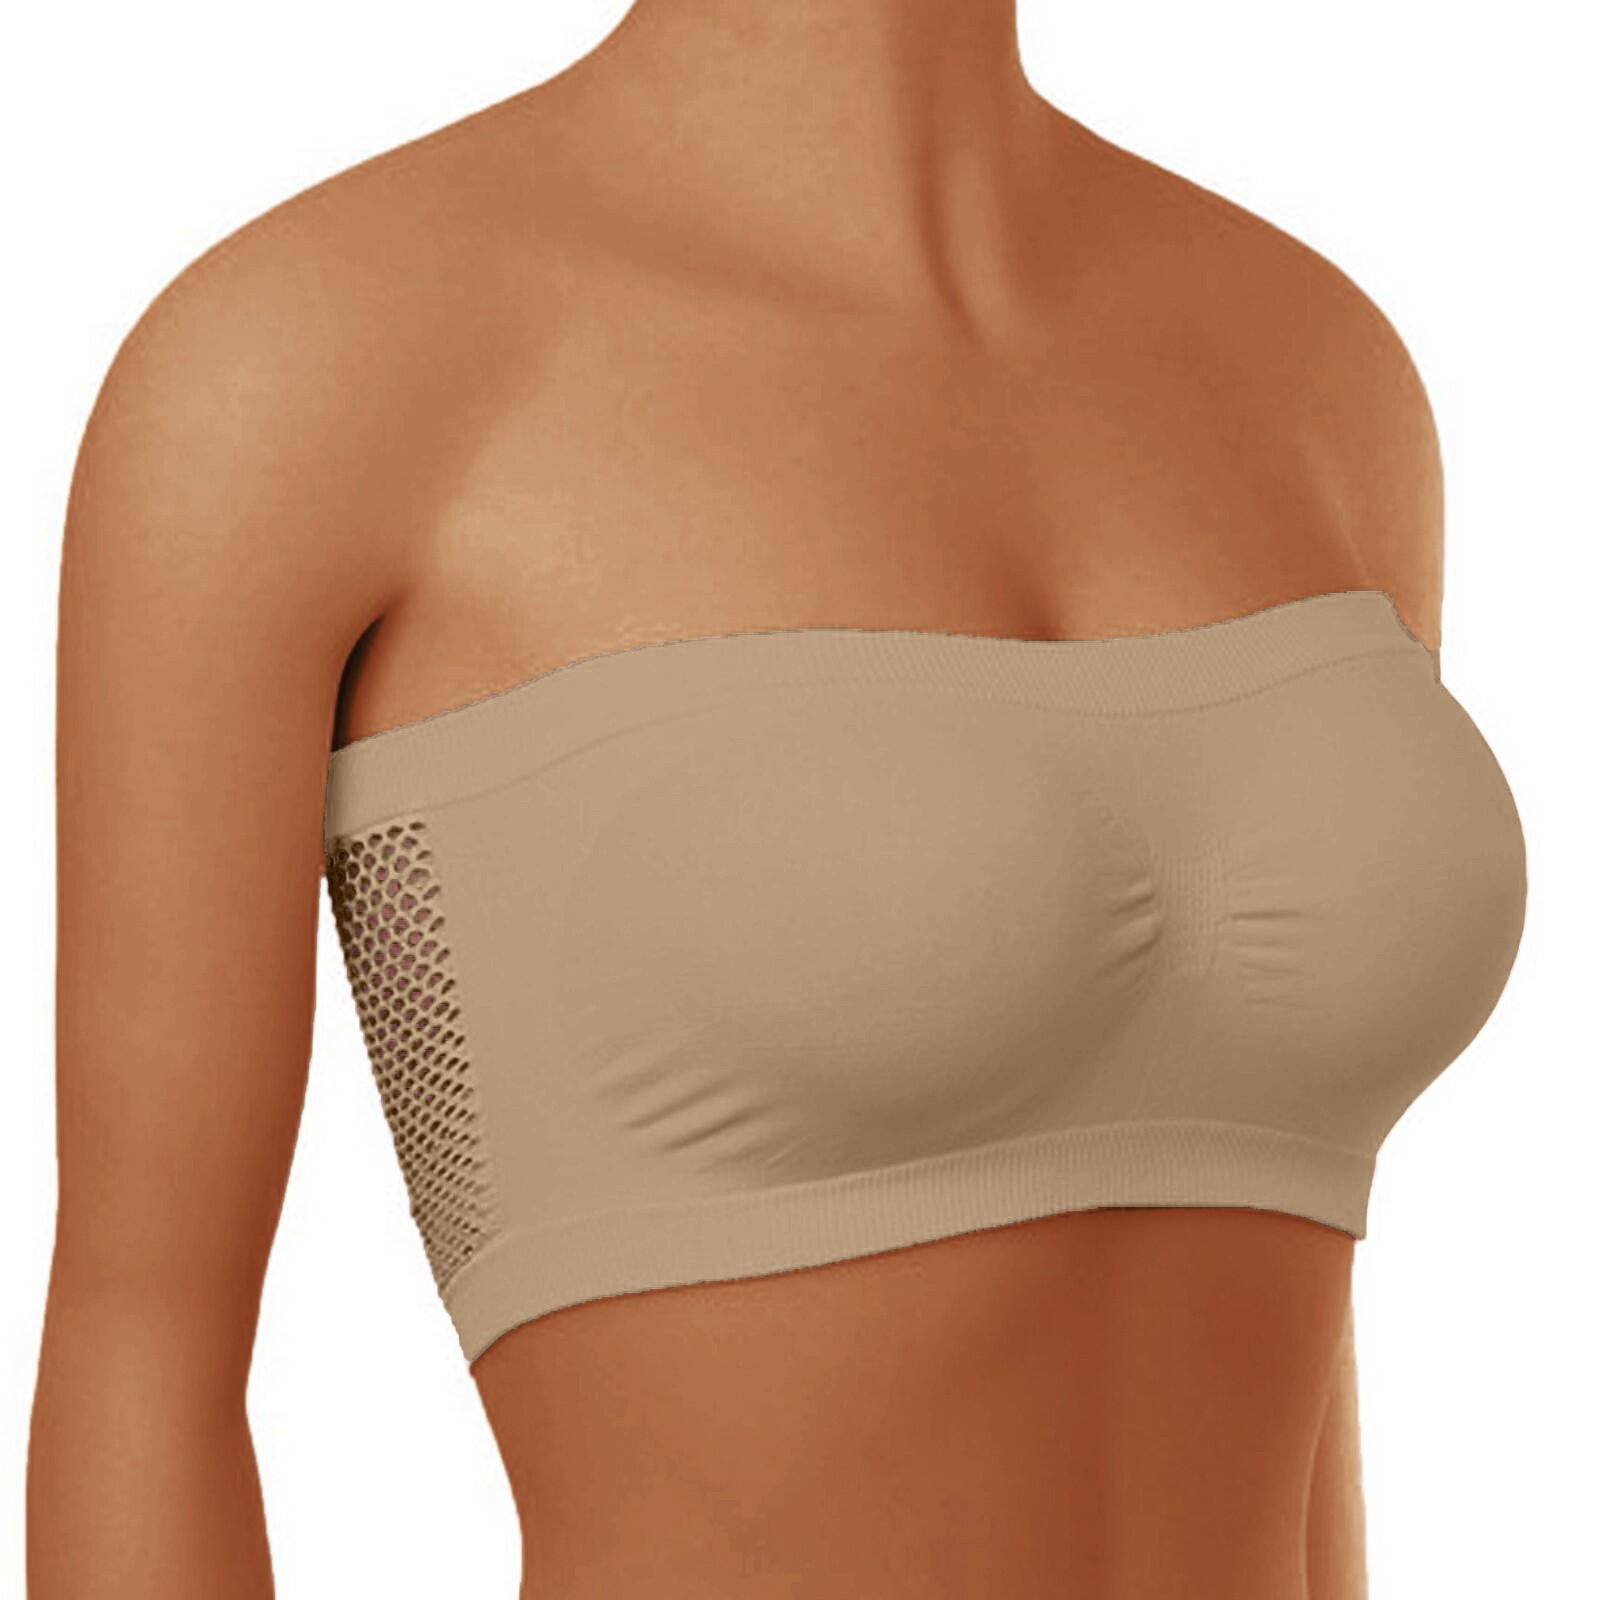 Qcmgmg Strapless Sports Bra Seamless Tube Top Compression Bandeau